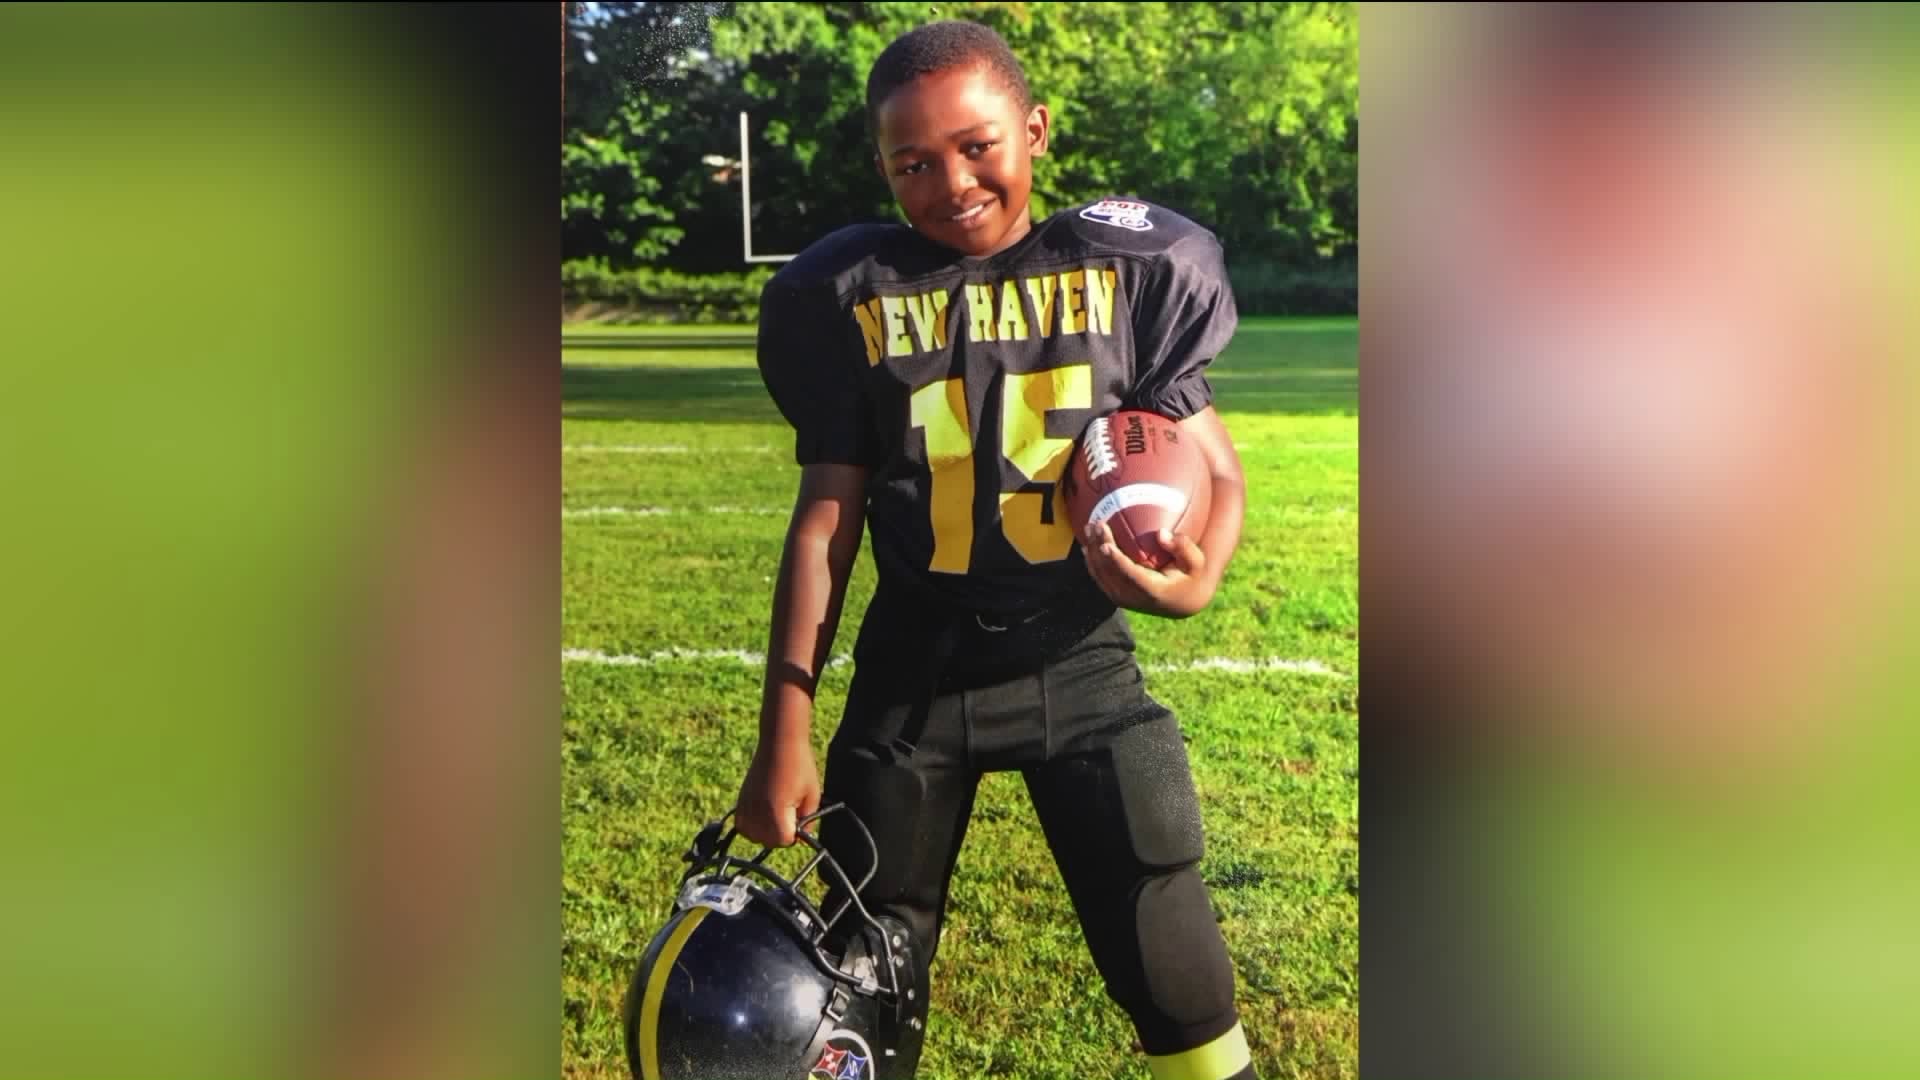 New Haven youth football league under fire